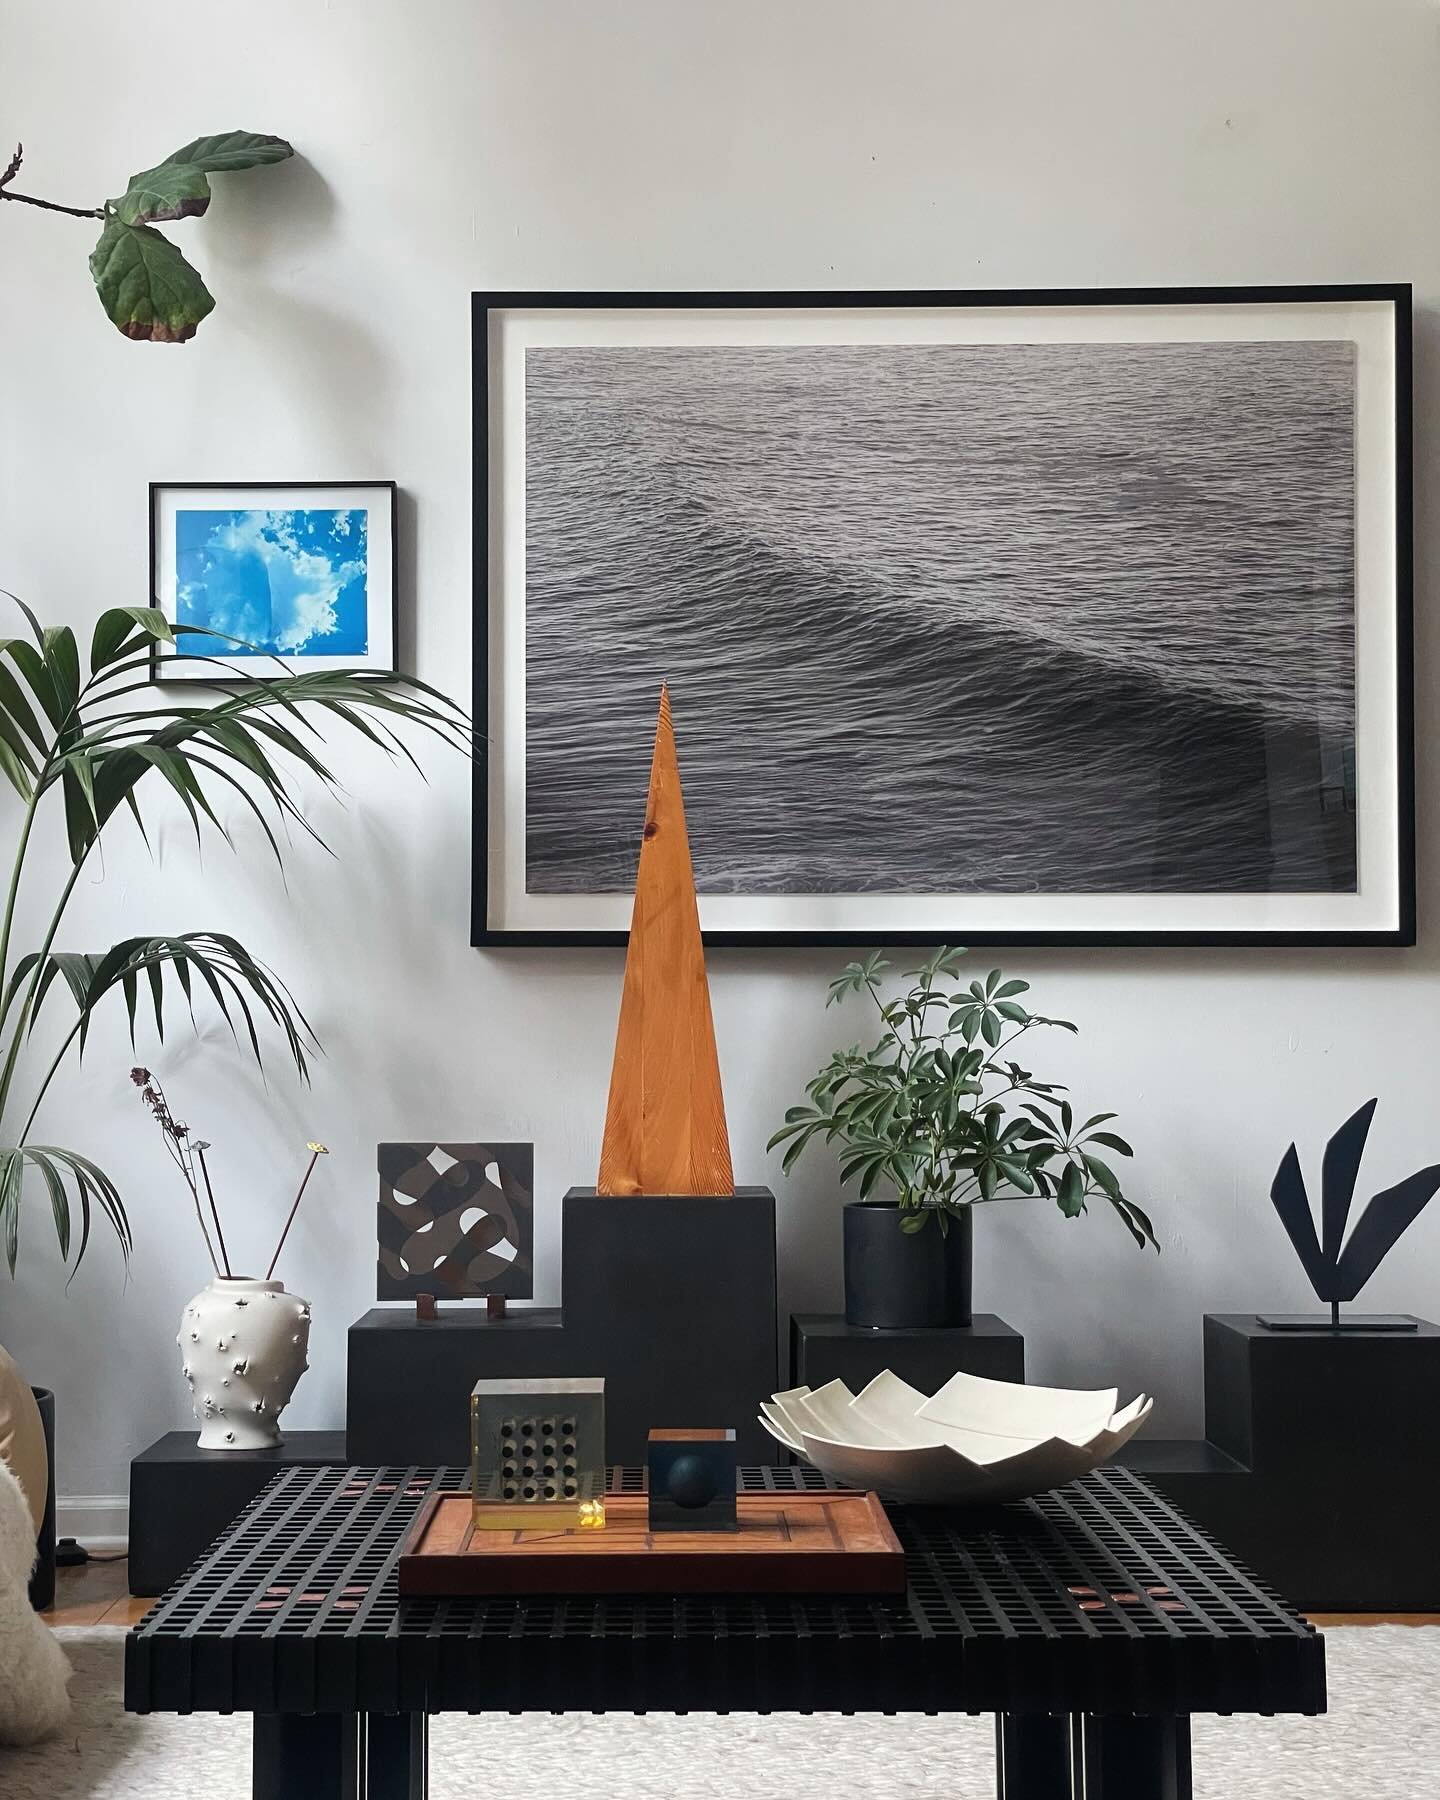 Love this mellow wave photo!!!! Picked up a few large format framed photos from my guy @dialmformodern thanks Tim! I&rsquo;m always trying to mix up art on my walls at home with paintings and photos.